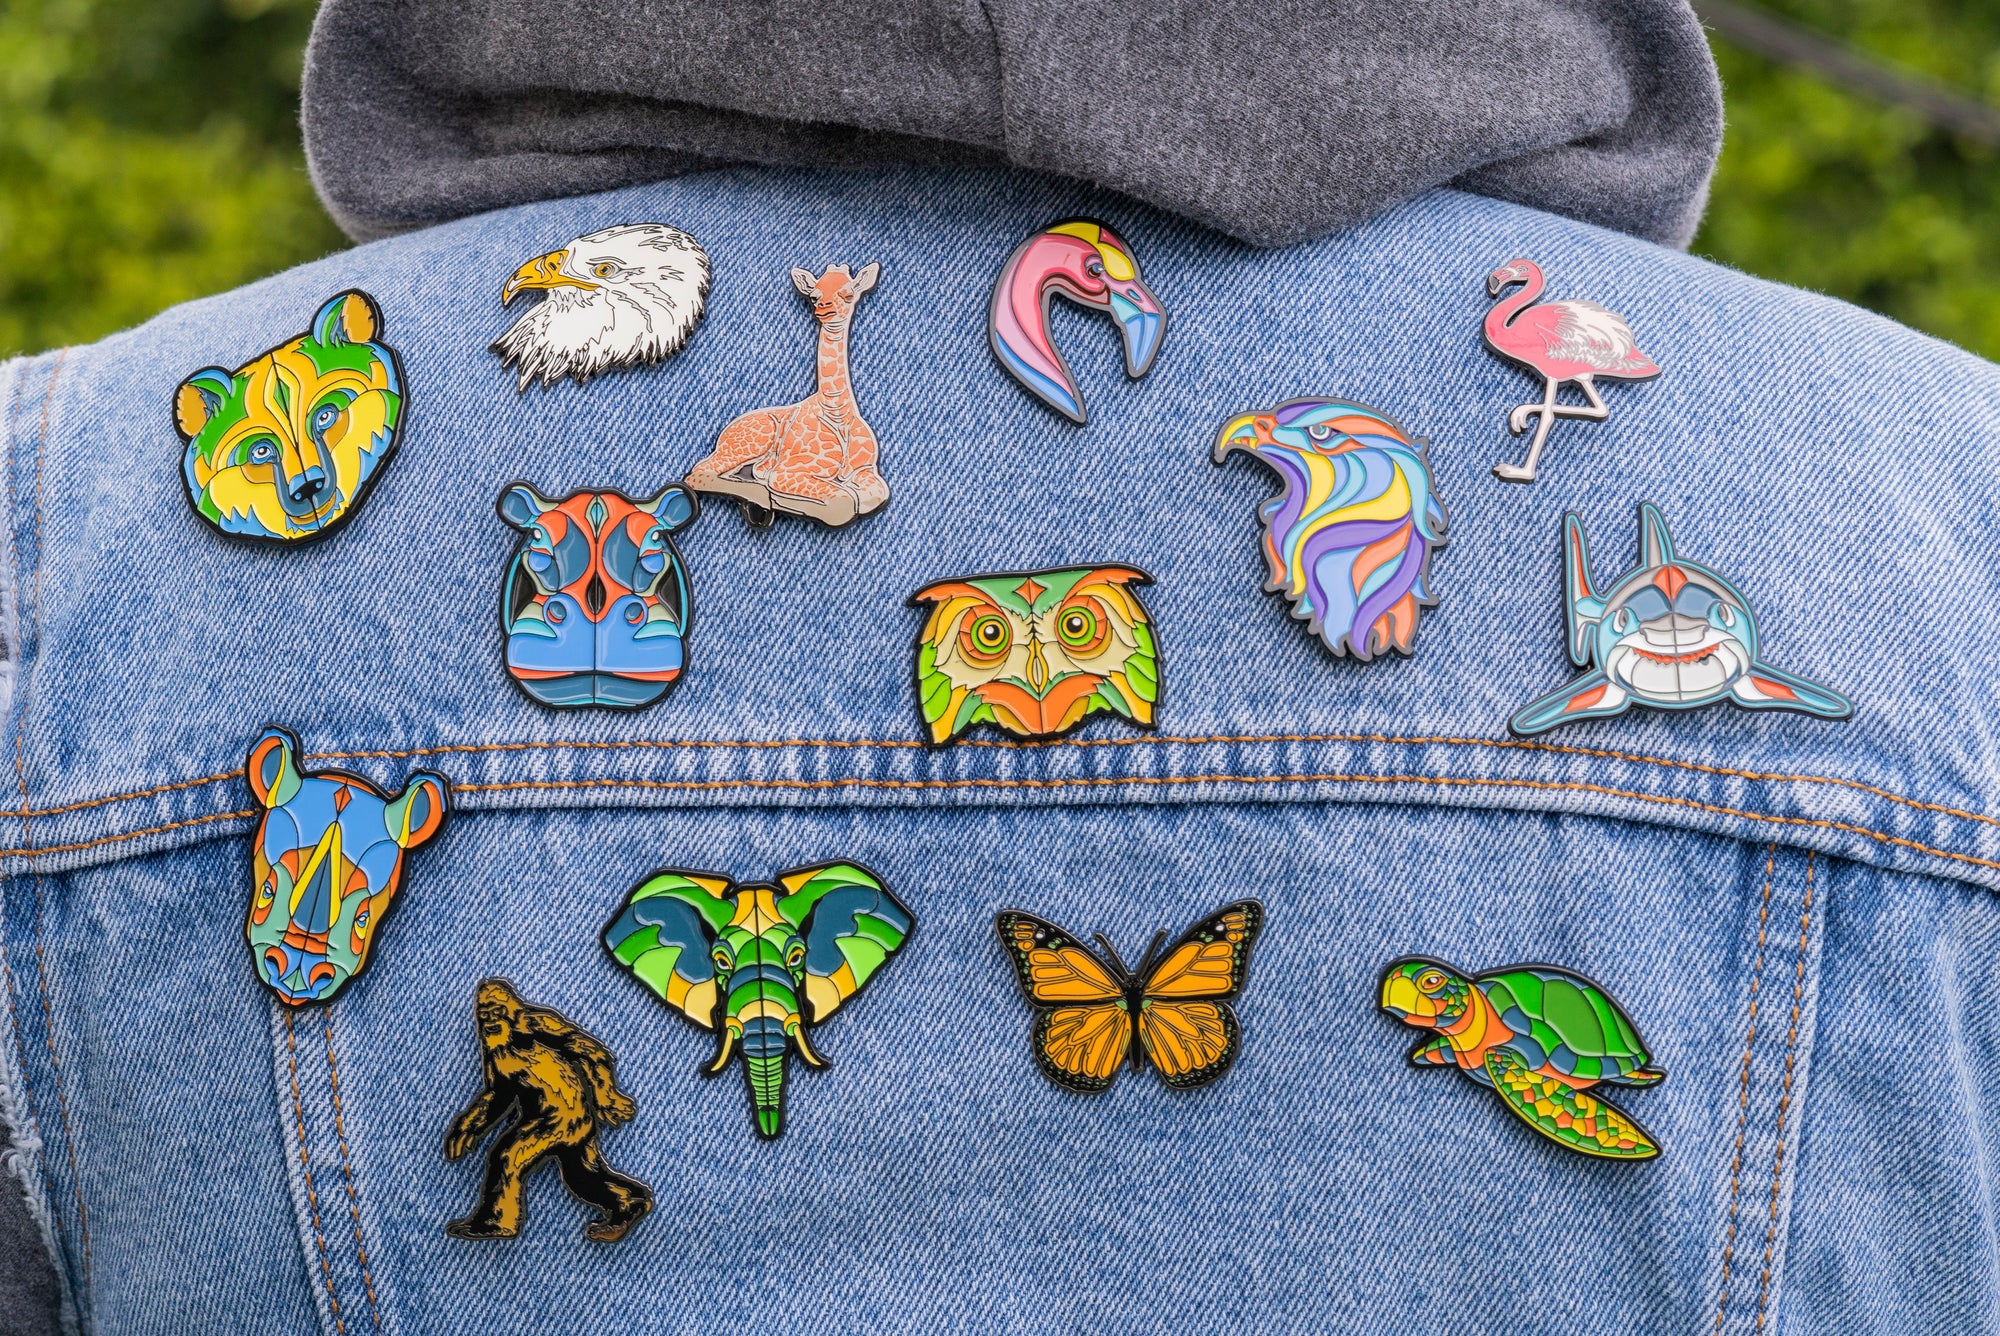 Blue Planet Jewelry, animal stylized enamel pin collection